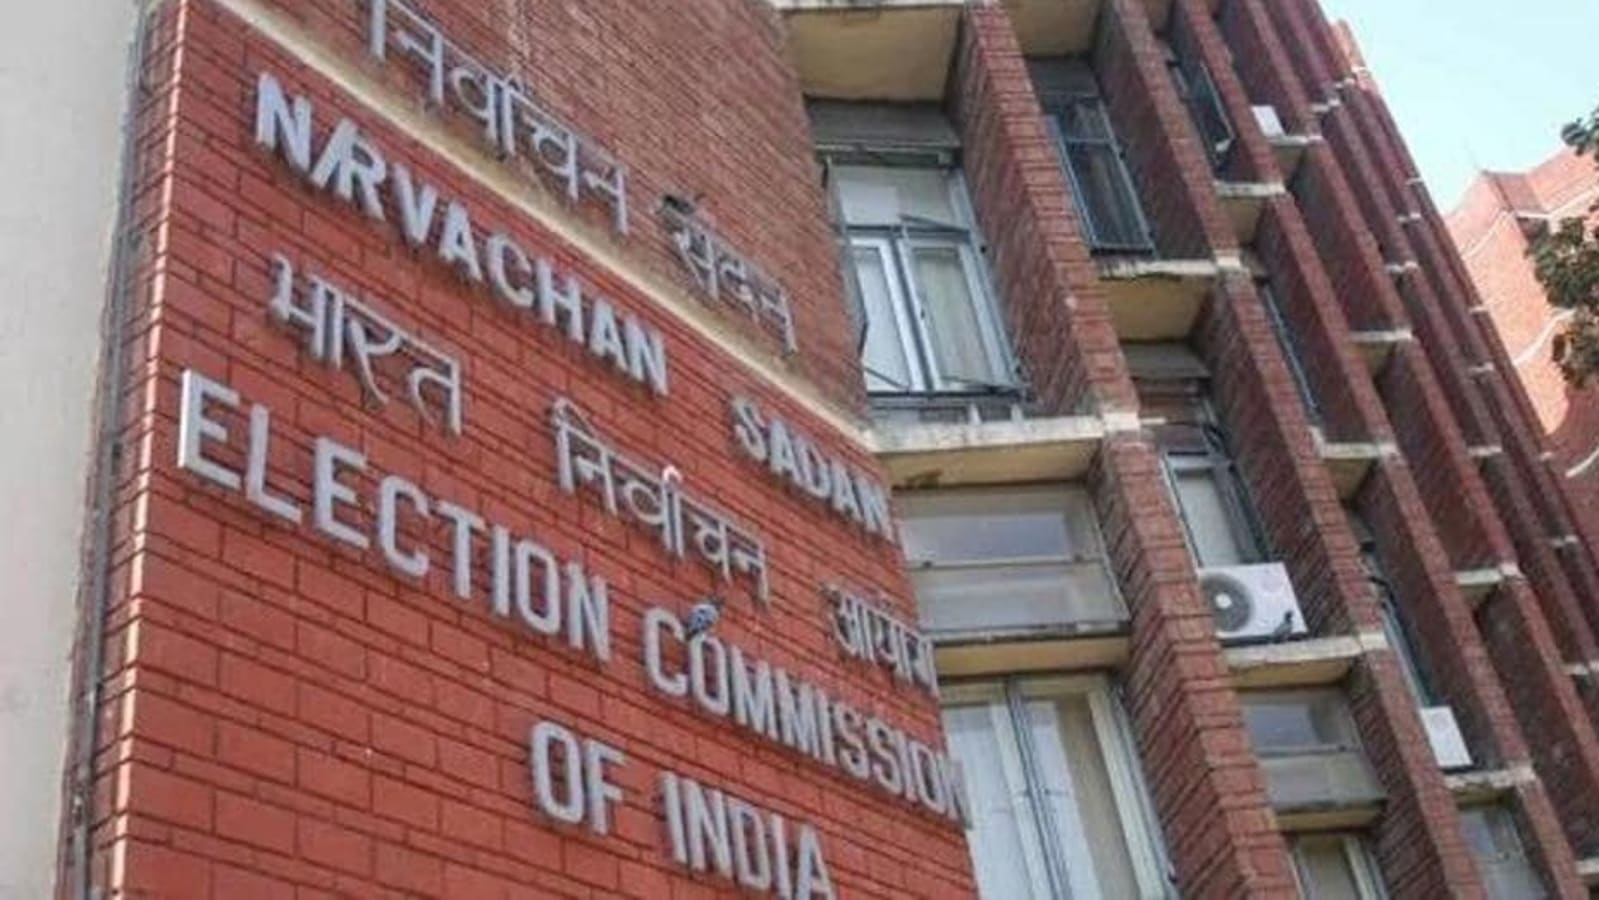 Election Commission expected to announce poll dates for Gujarat, Himachal  today | Latest News India - Hindustan Times